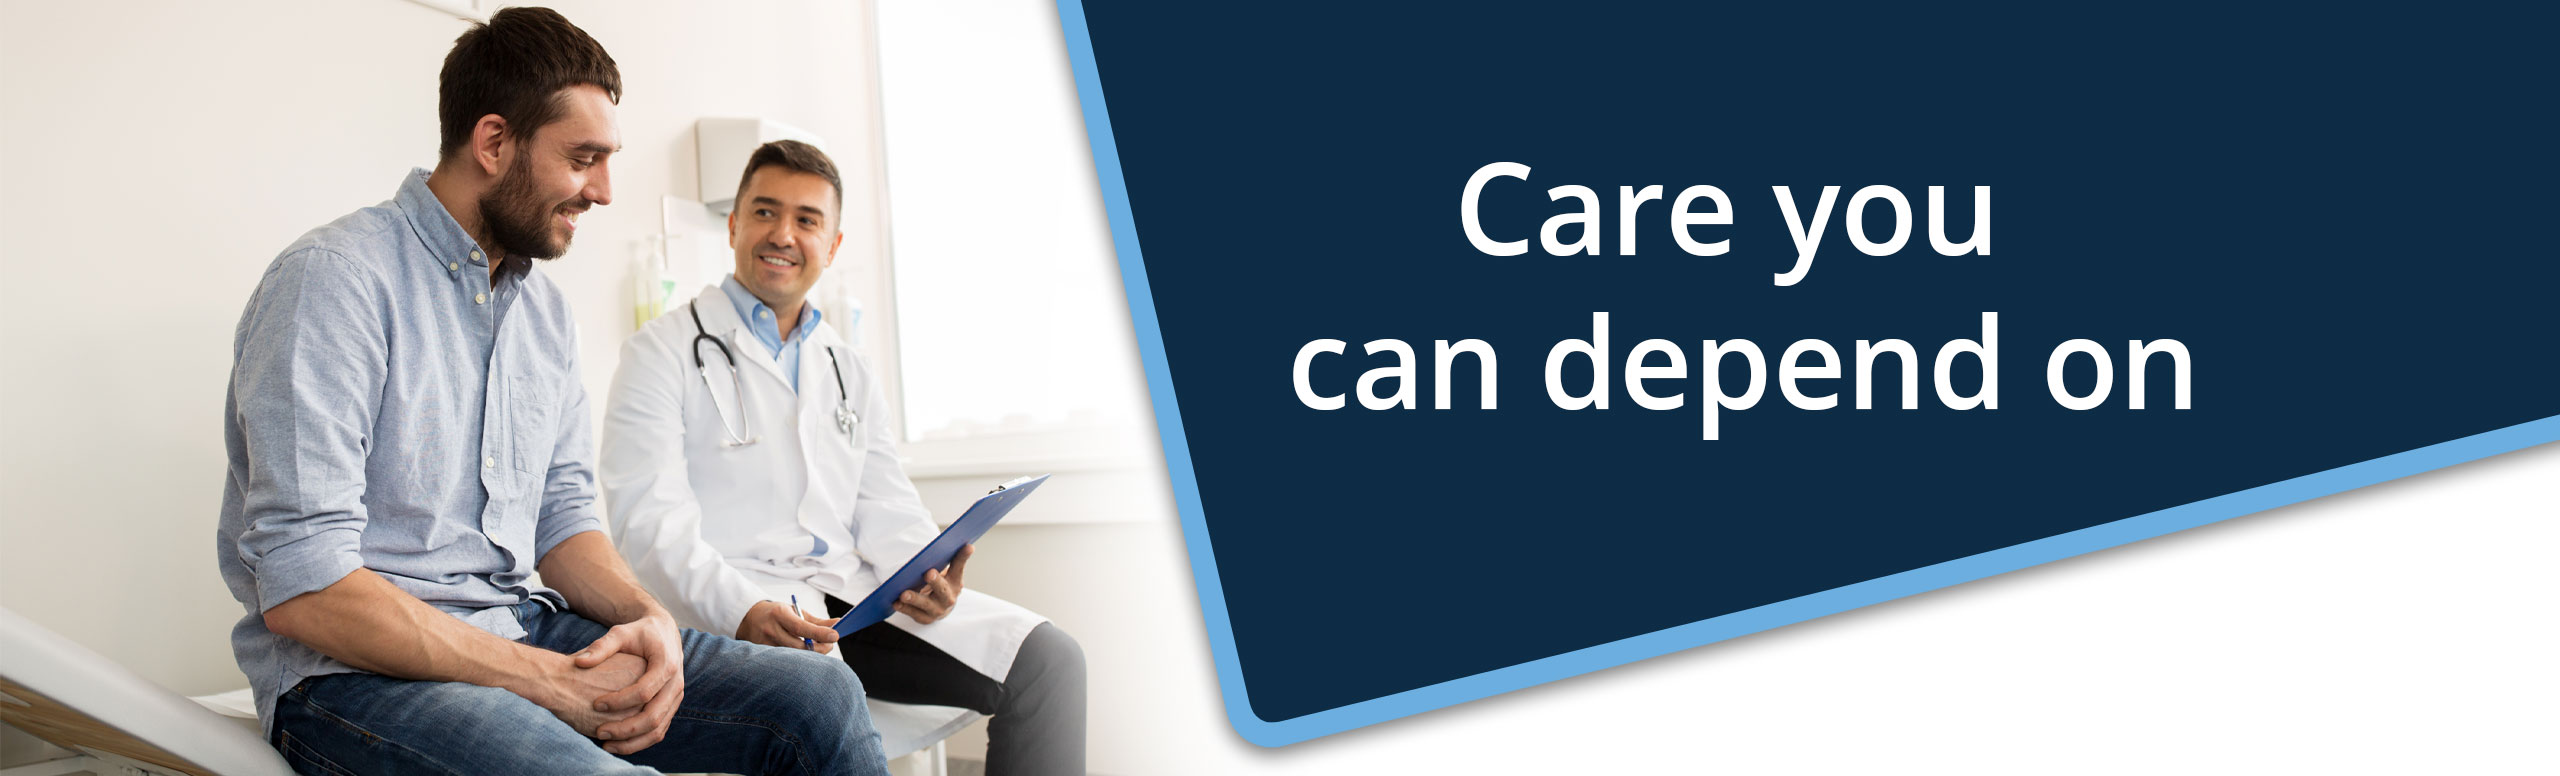 Banner picture of a male patient sitting next to a male Physician. They are both smiling. Banner says:

Care yiu can depend on